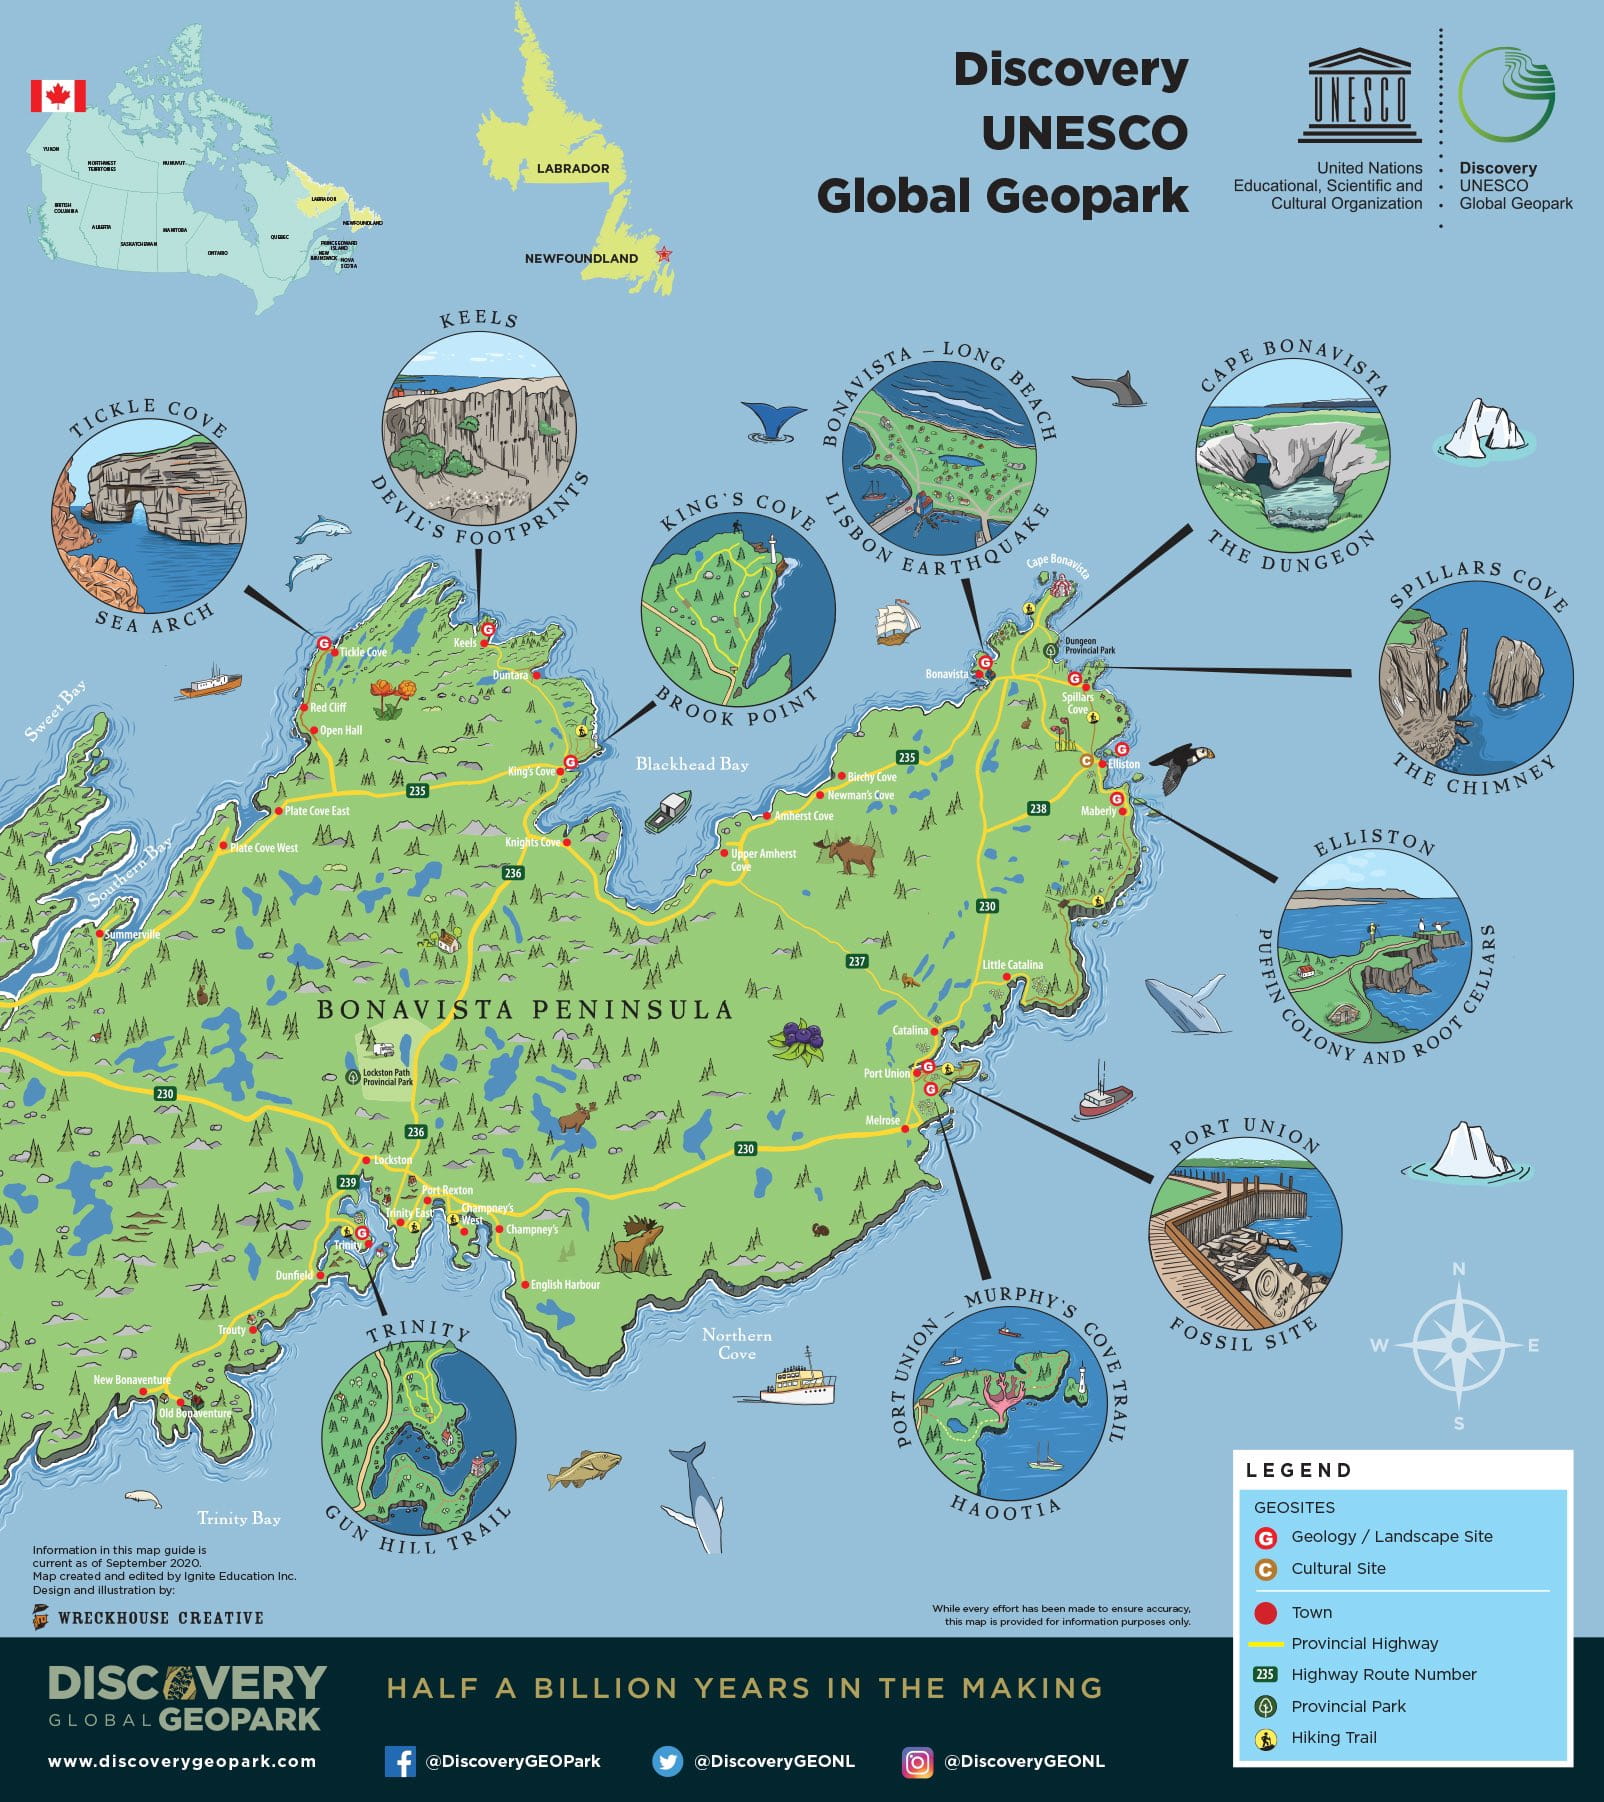 map of the Discovery UNESO Global Geopark